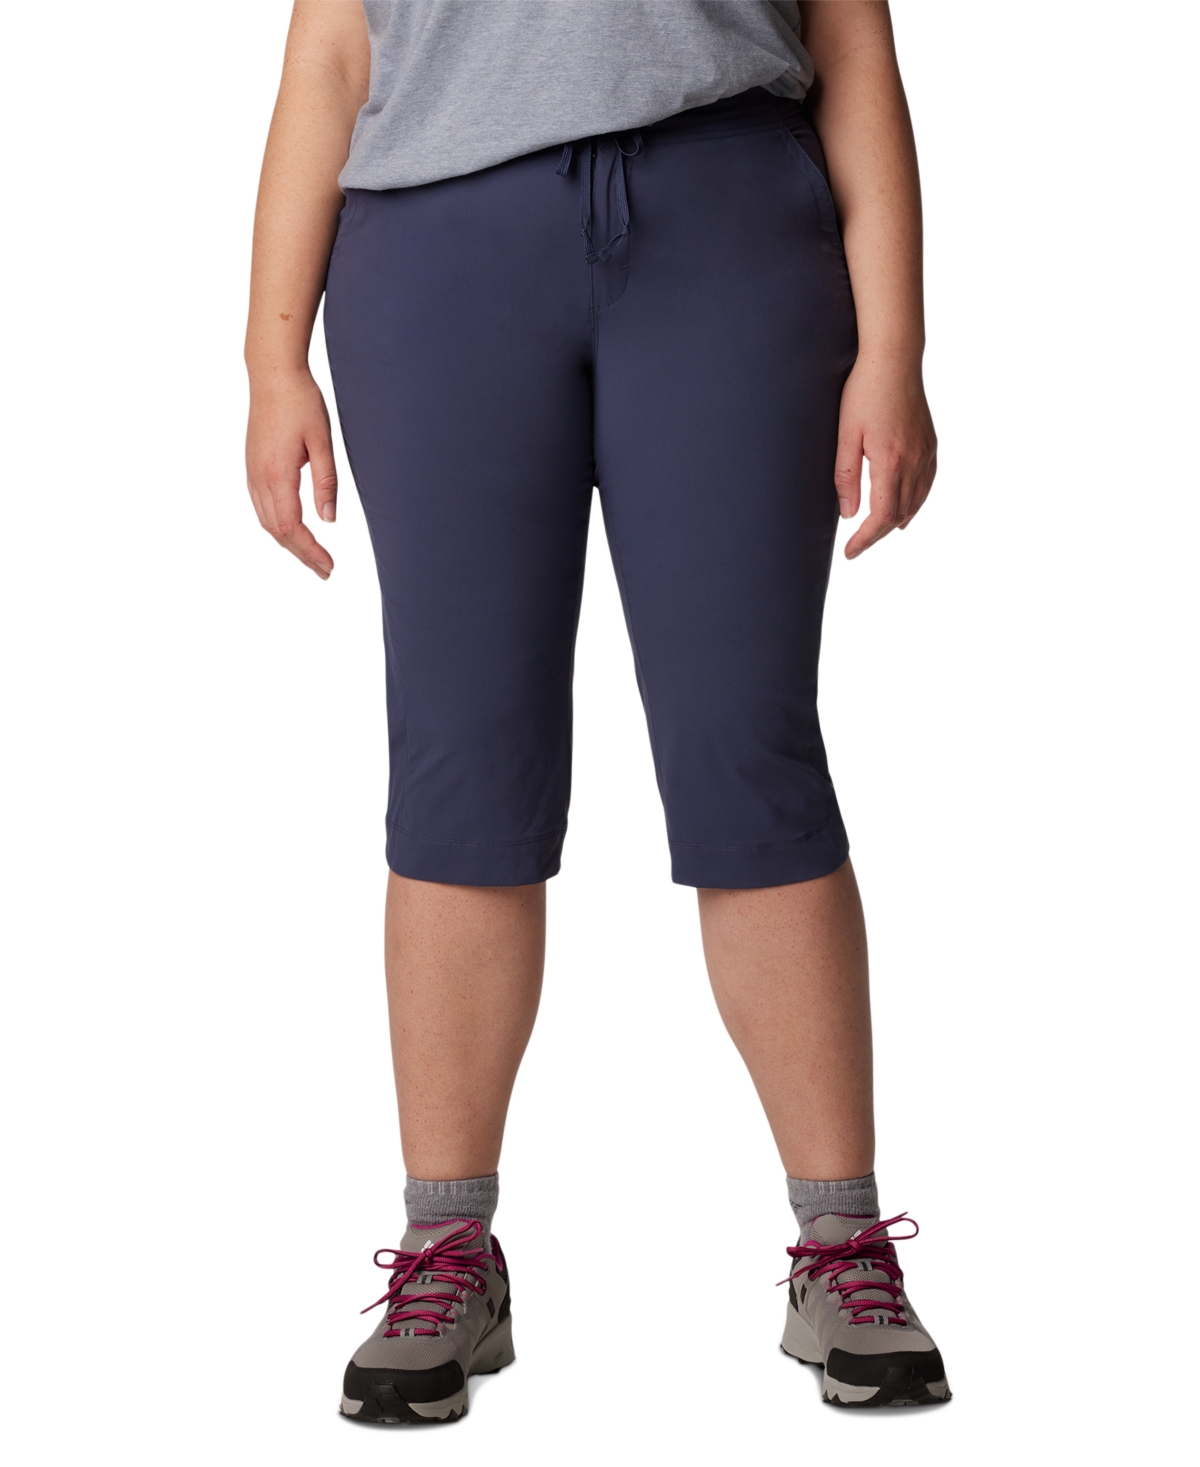 Plus Size Anytime Outdoor Capri Pants - Nocturnal